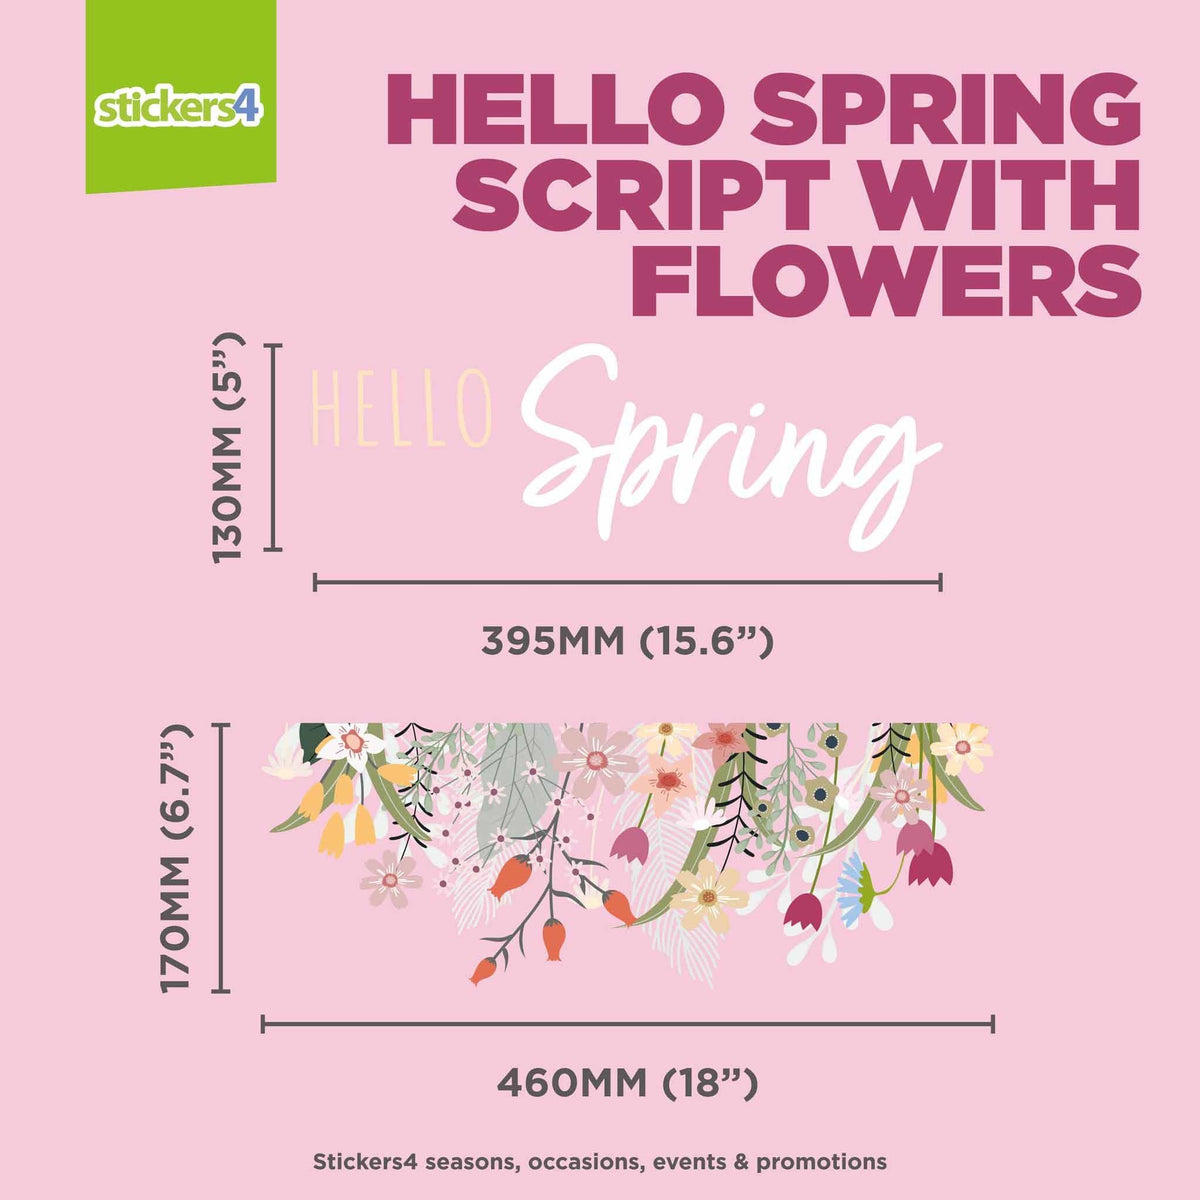 Hello Spring Script with Flowers Window Stickers